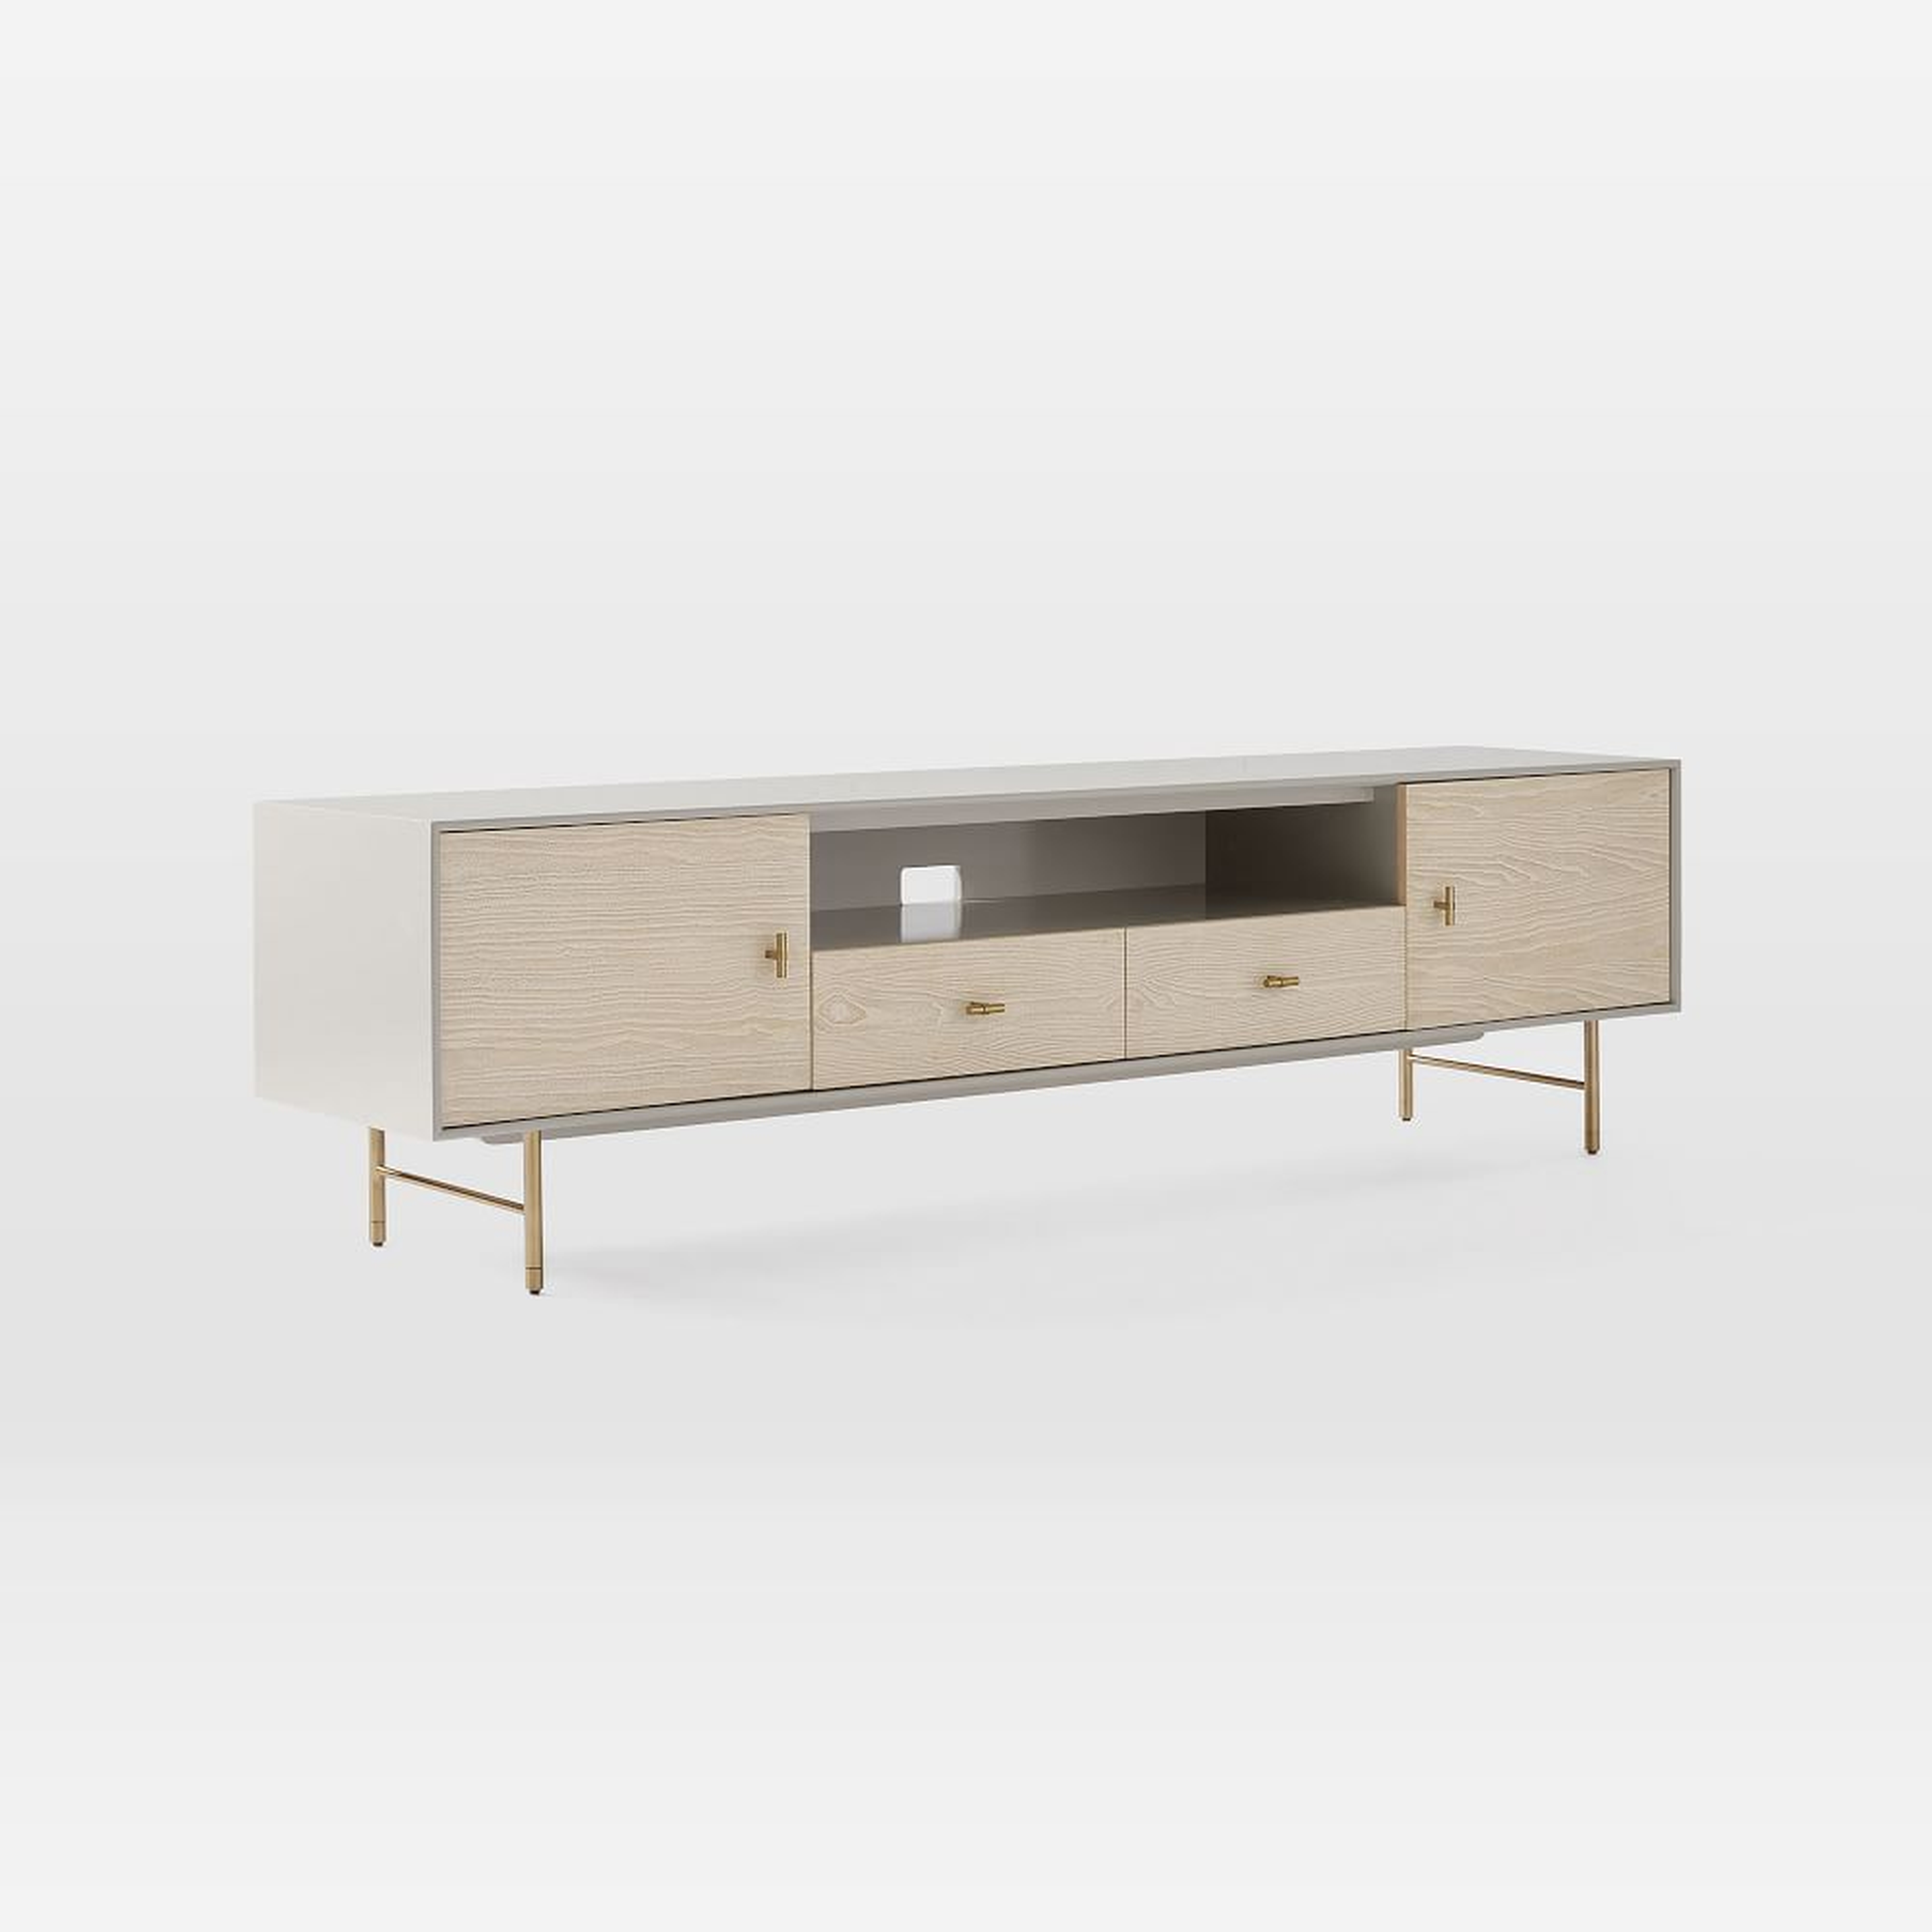 Modernist Wood + Lacquer Media Console, 80", Winter Wood - West Elm